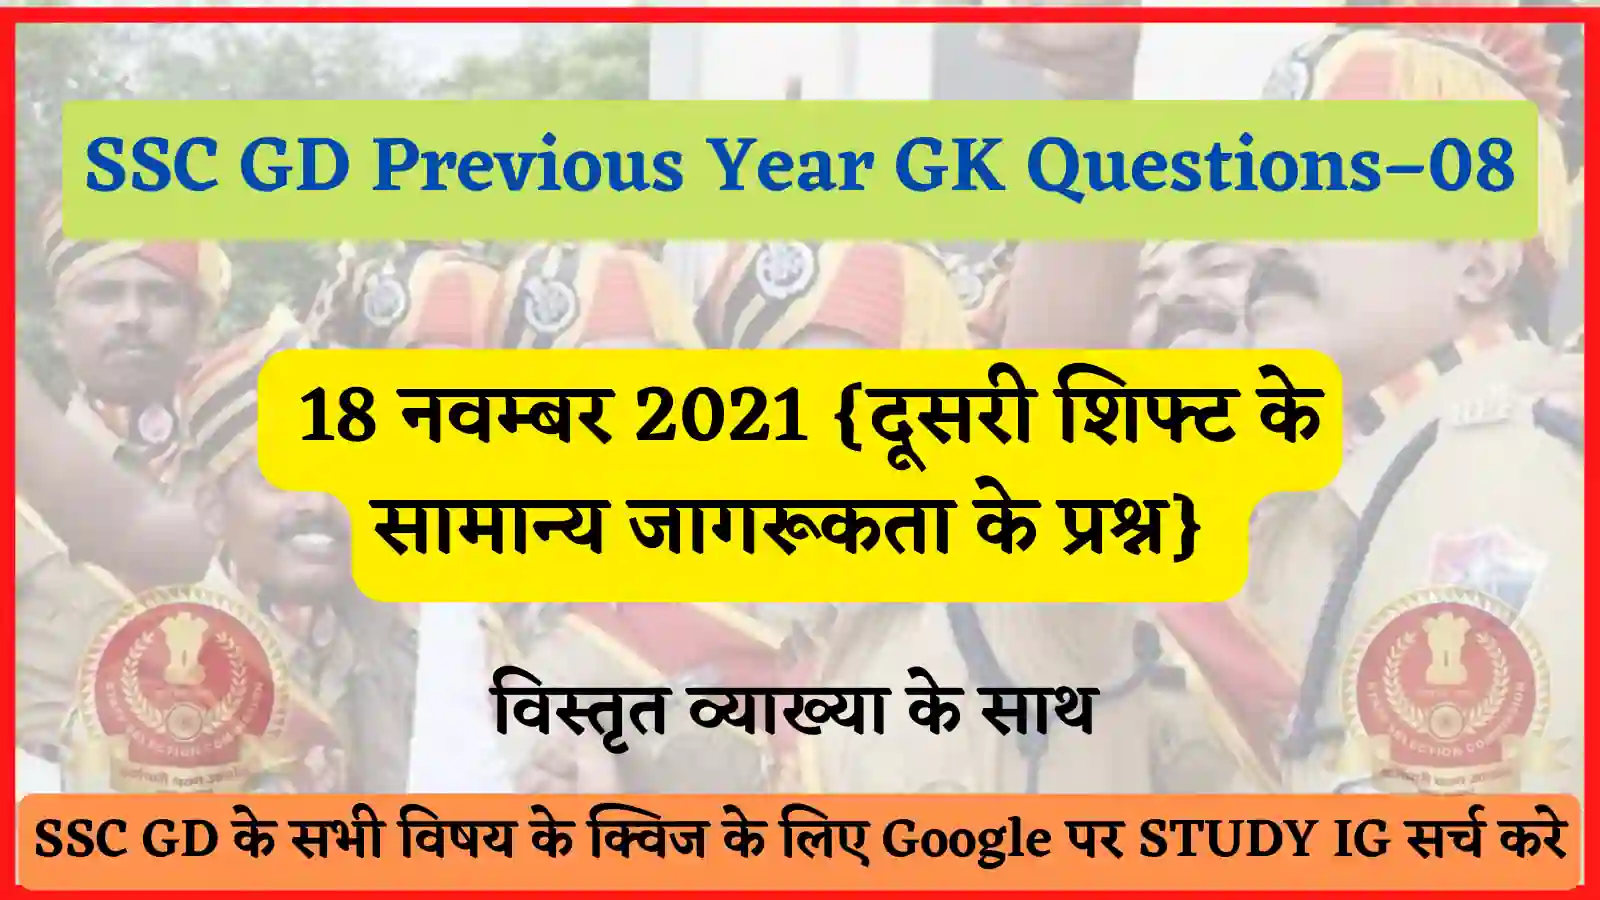 SSC GD Previous Year GK Questions/Quiz - 08